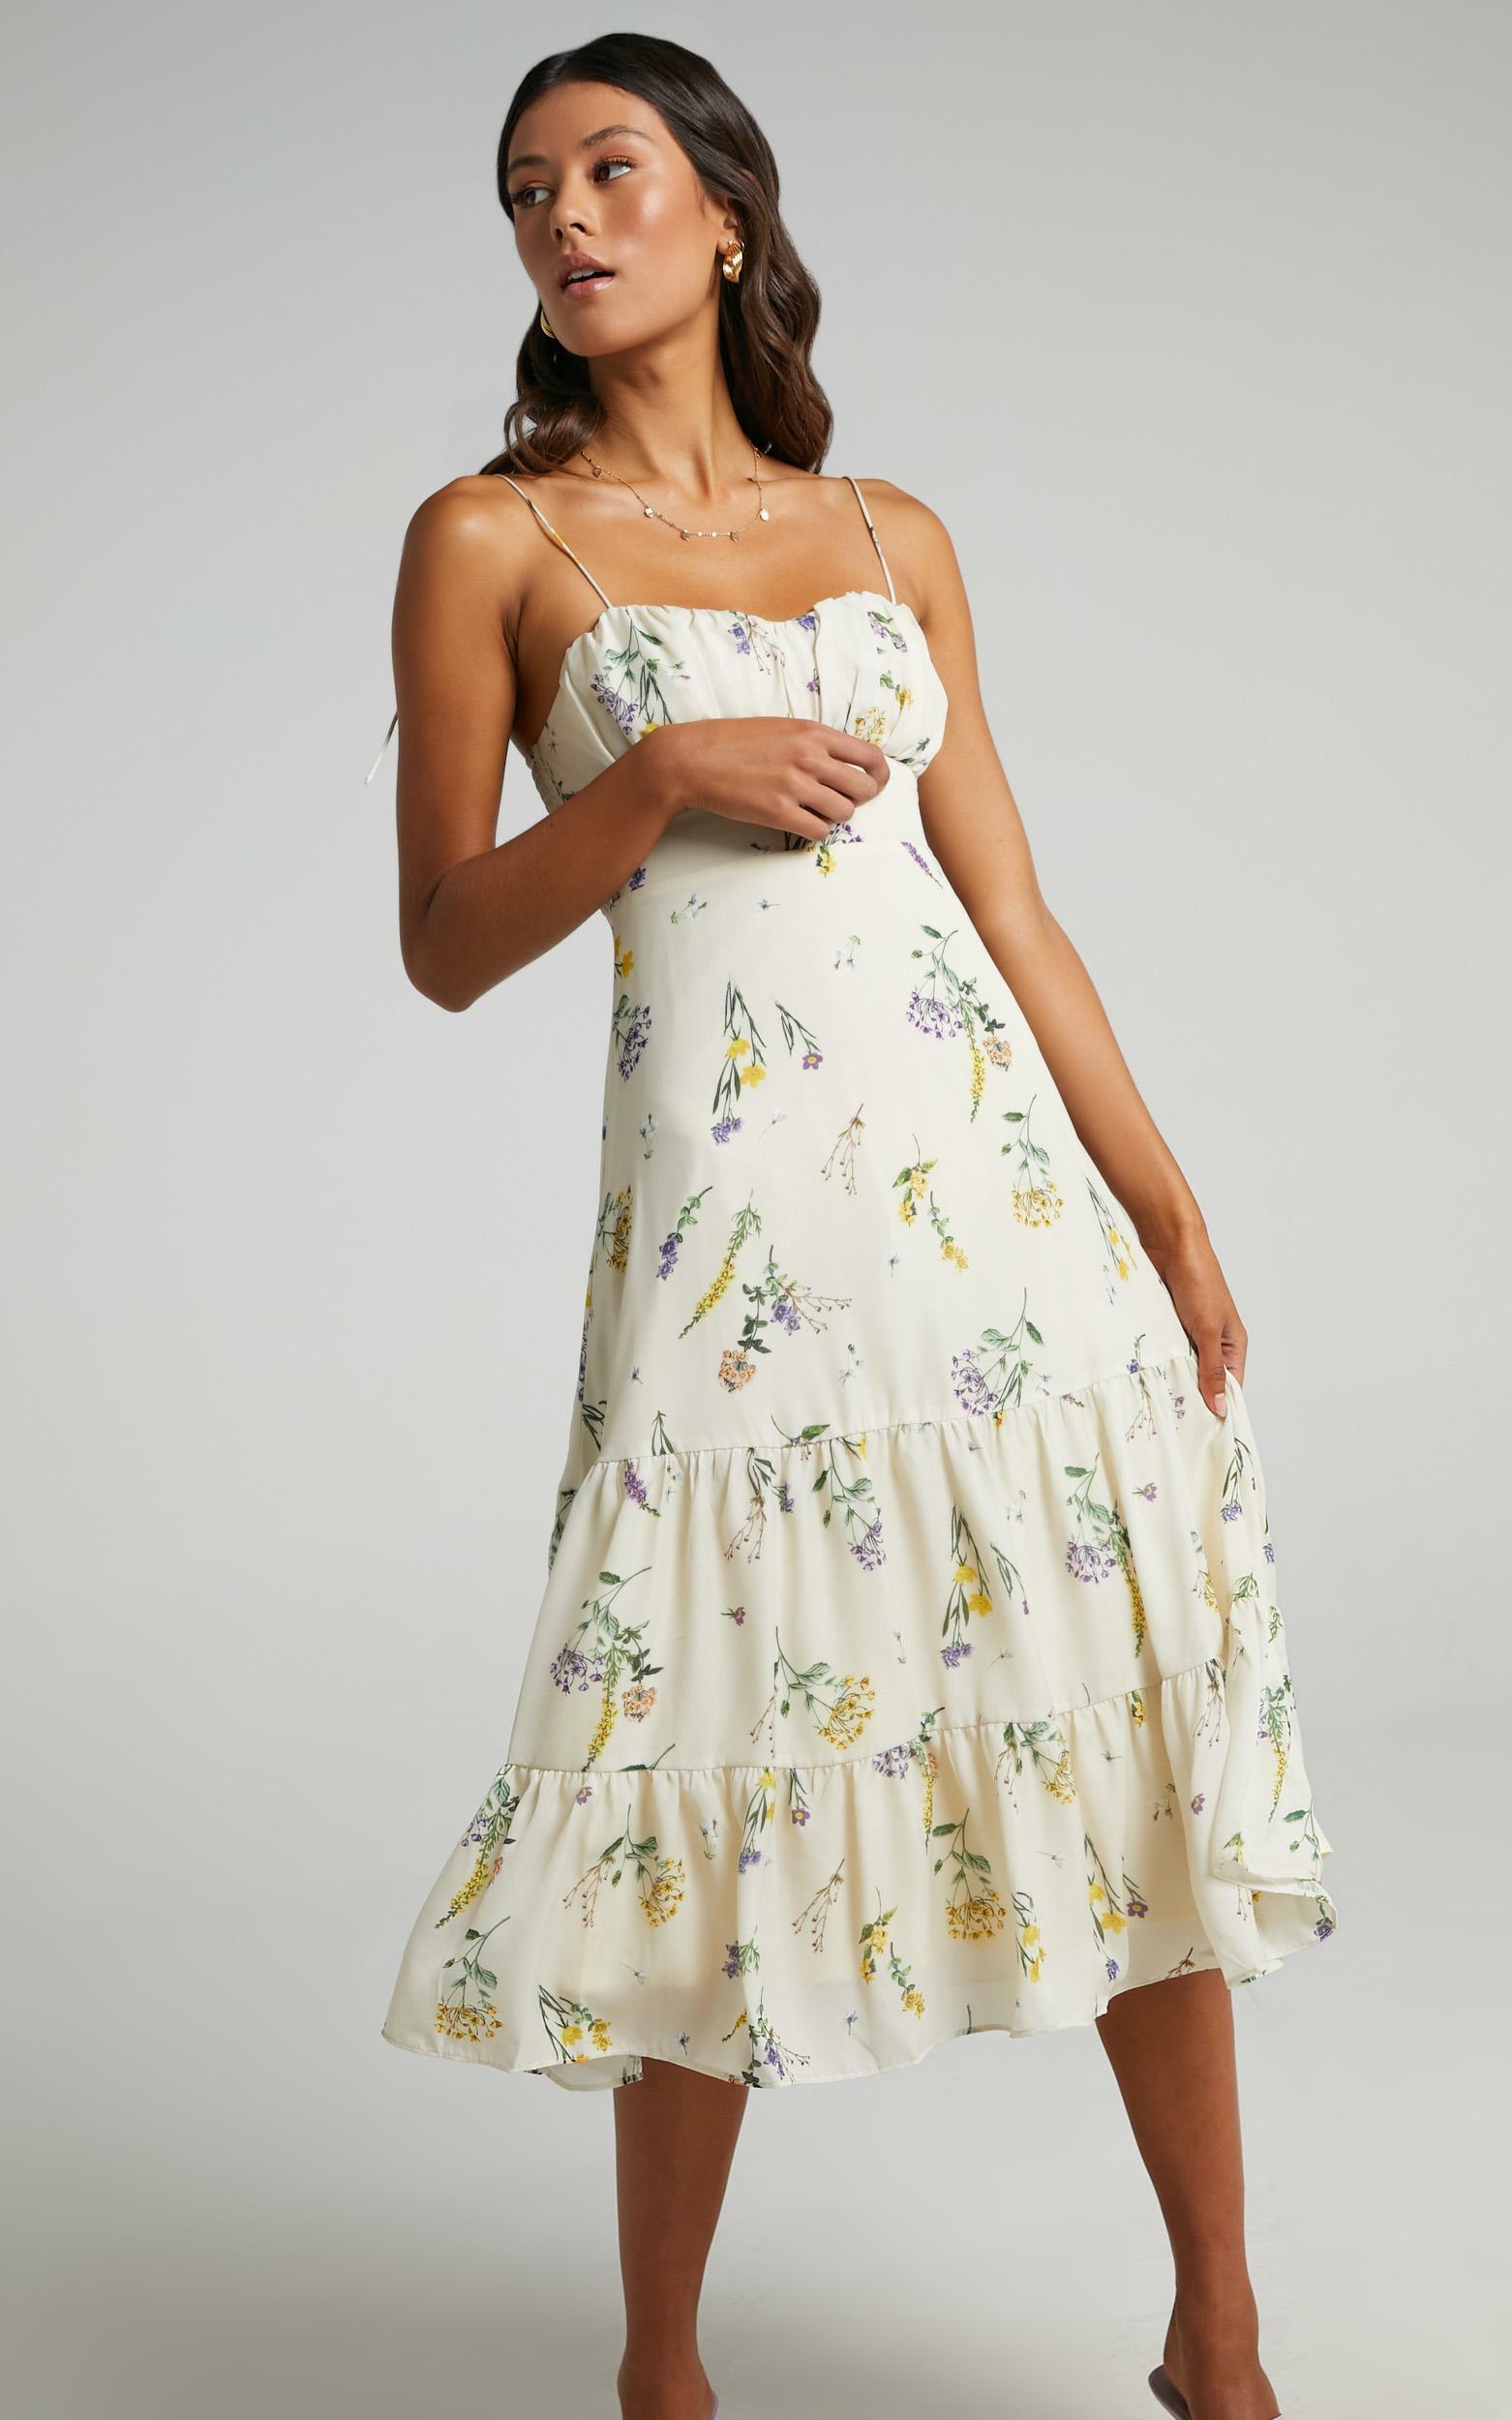 Monaco Sweetheart Midi Dress in Botanical floral - 04, CRE1, hi-res image number null